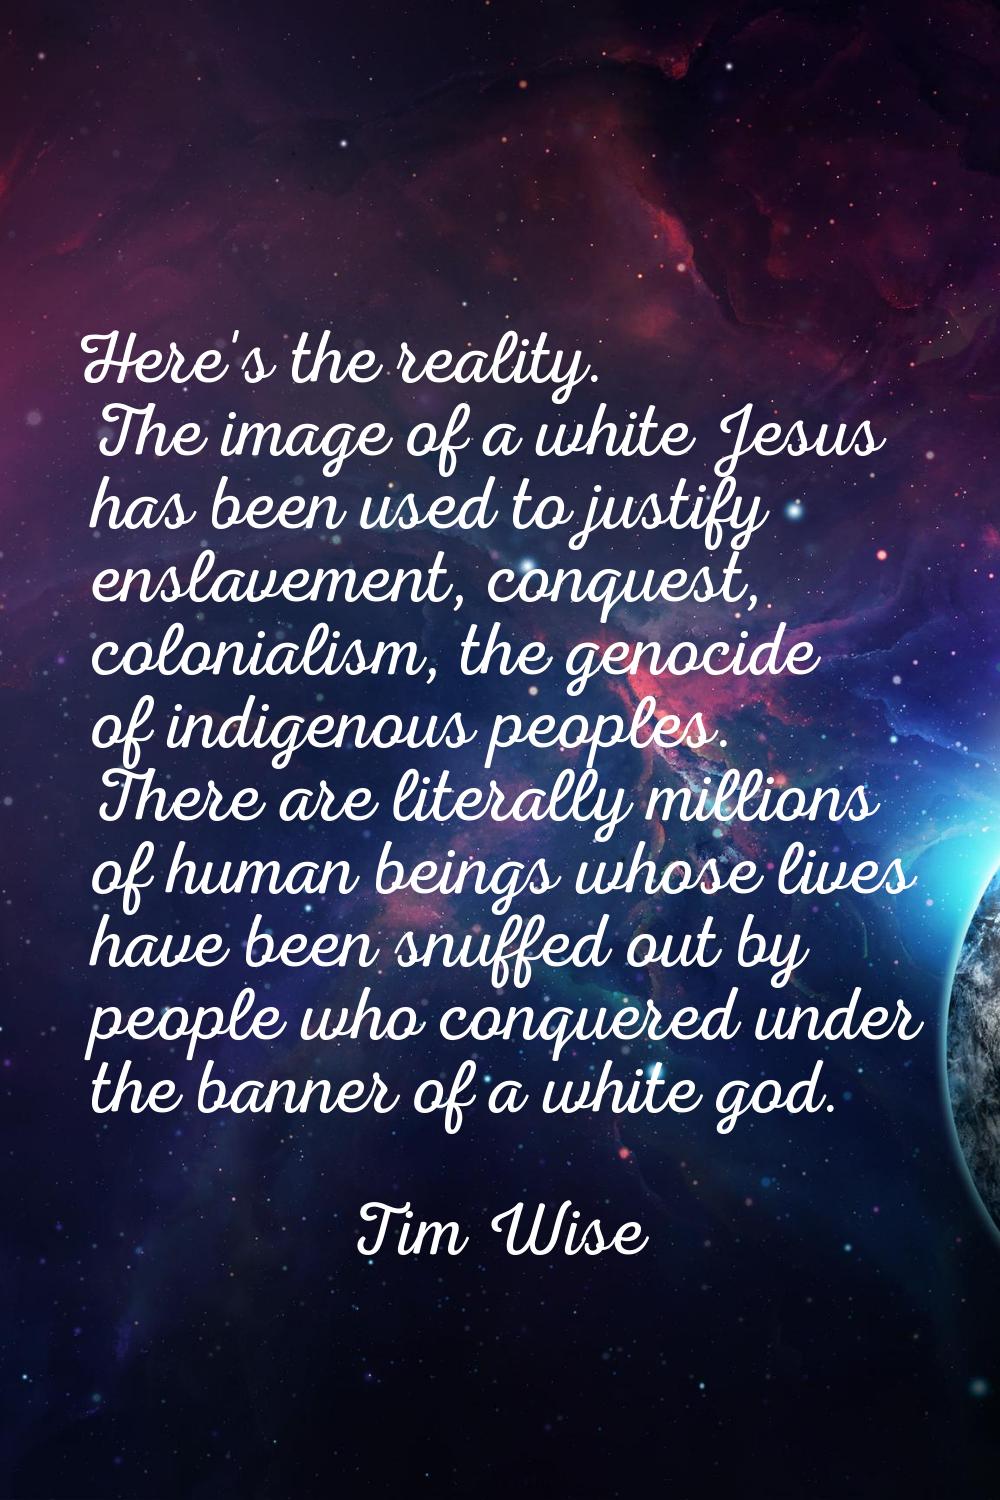 Here's the reality. The image of a white Jesus has been used to justify enslavement, conquest, colo